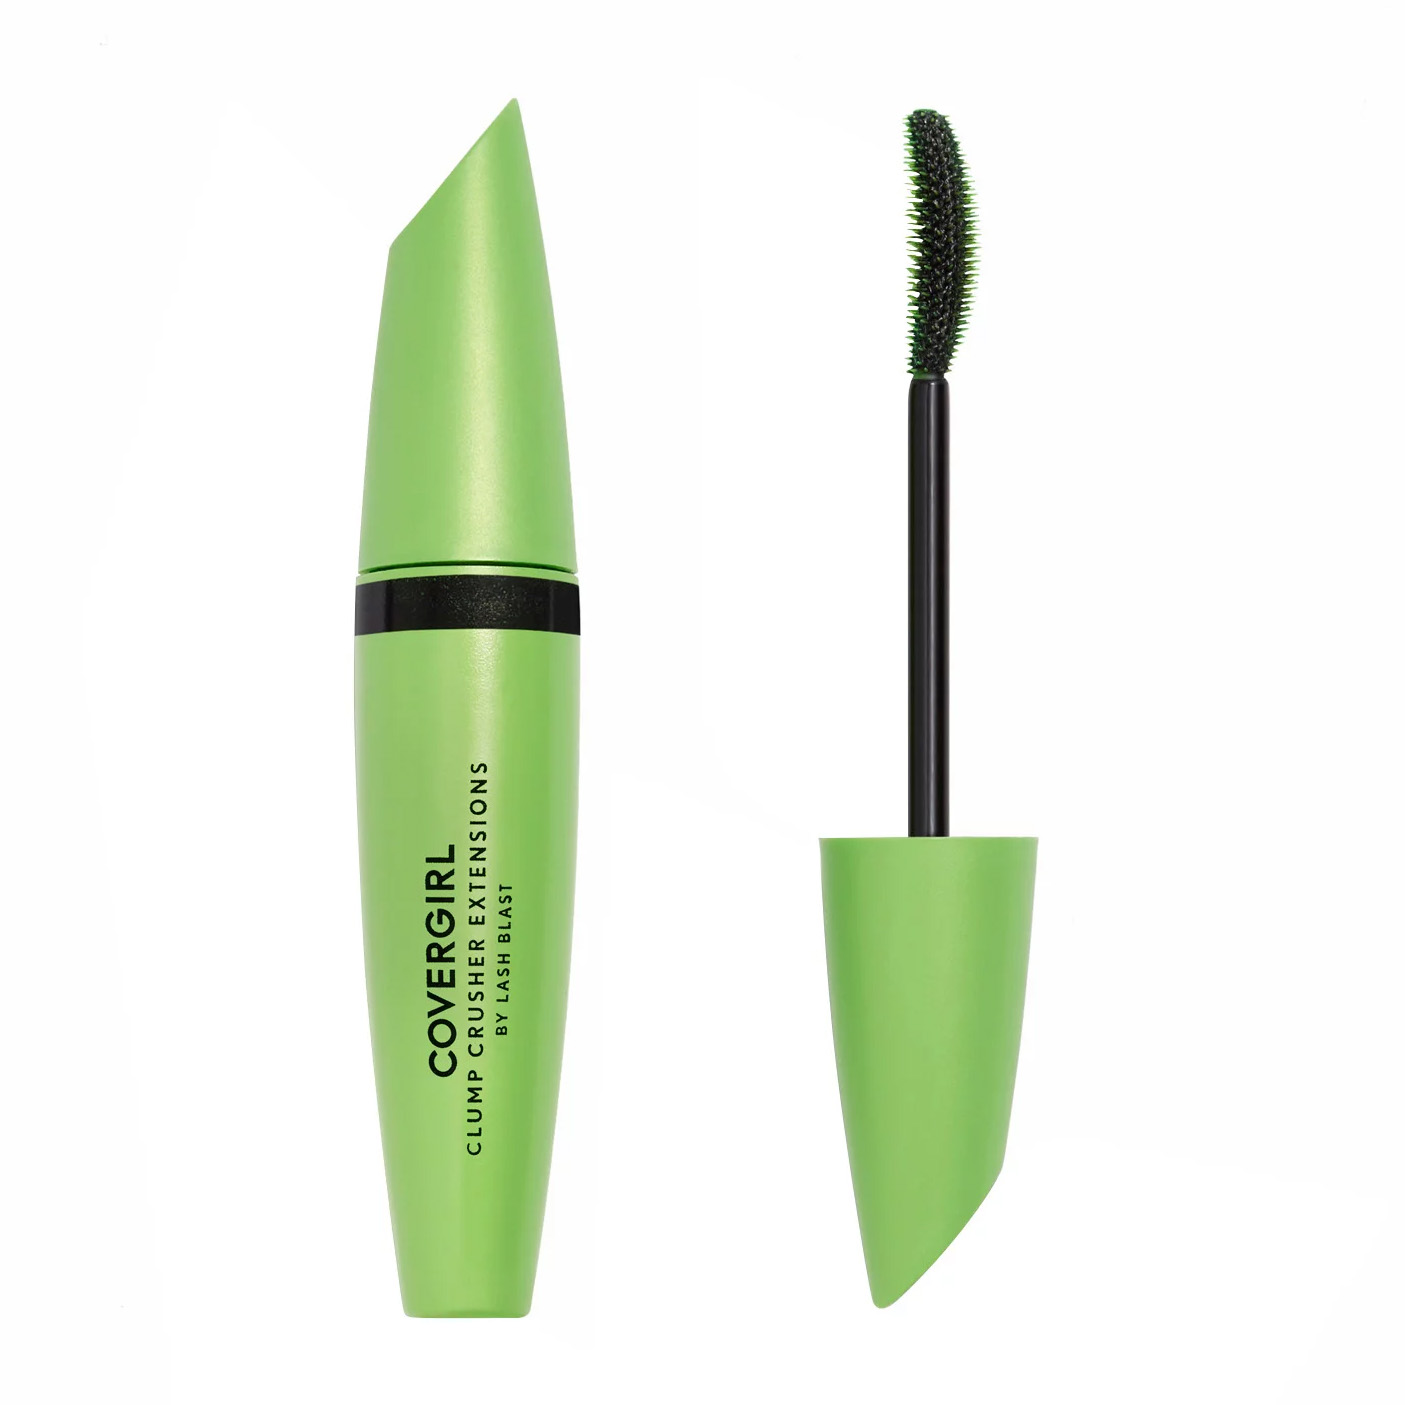 closed tube of covergirl mascara next to open spoolie brush